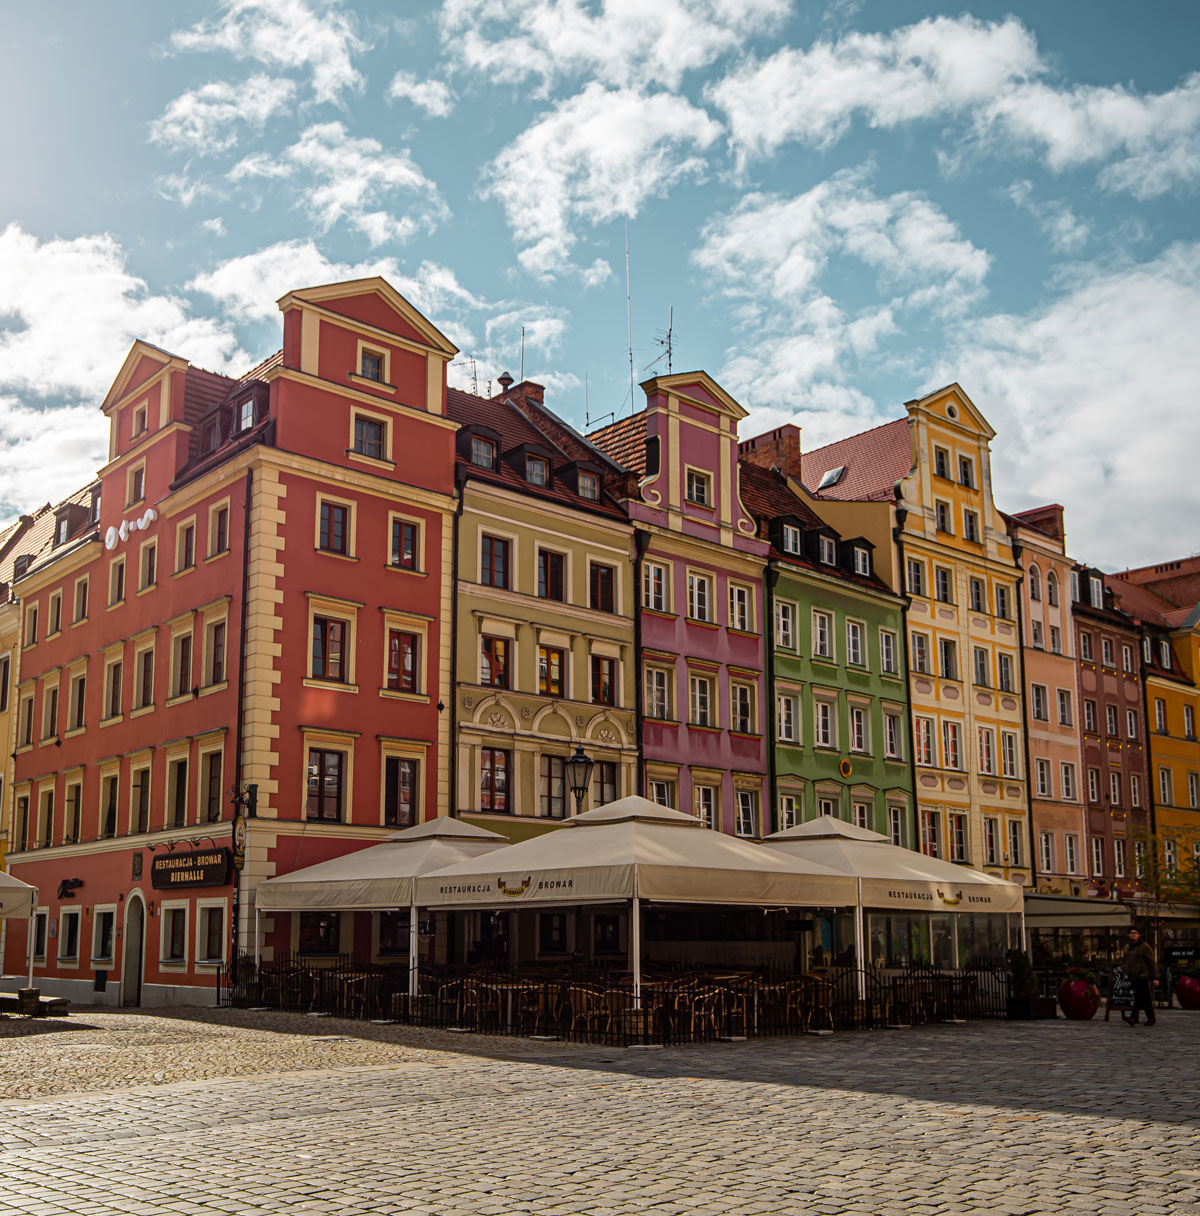 Wrocław market square things-to-do-in-wroclaw-poland-kelseyinlondon-kelsey-heinrichs-uk-travel-blogger-Wrocław-travel-guide